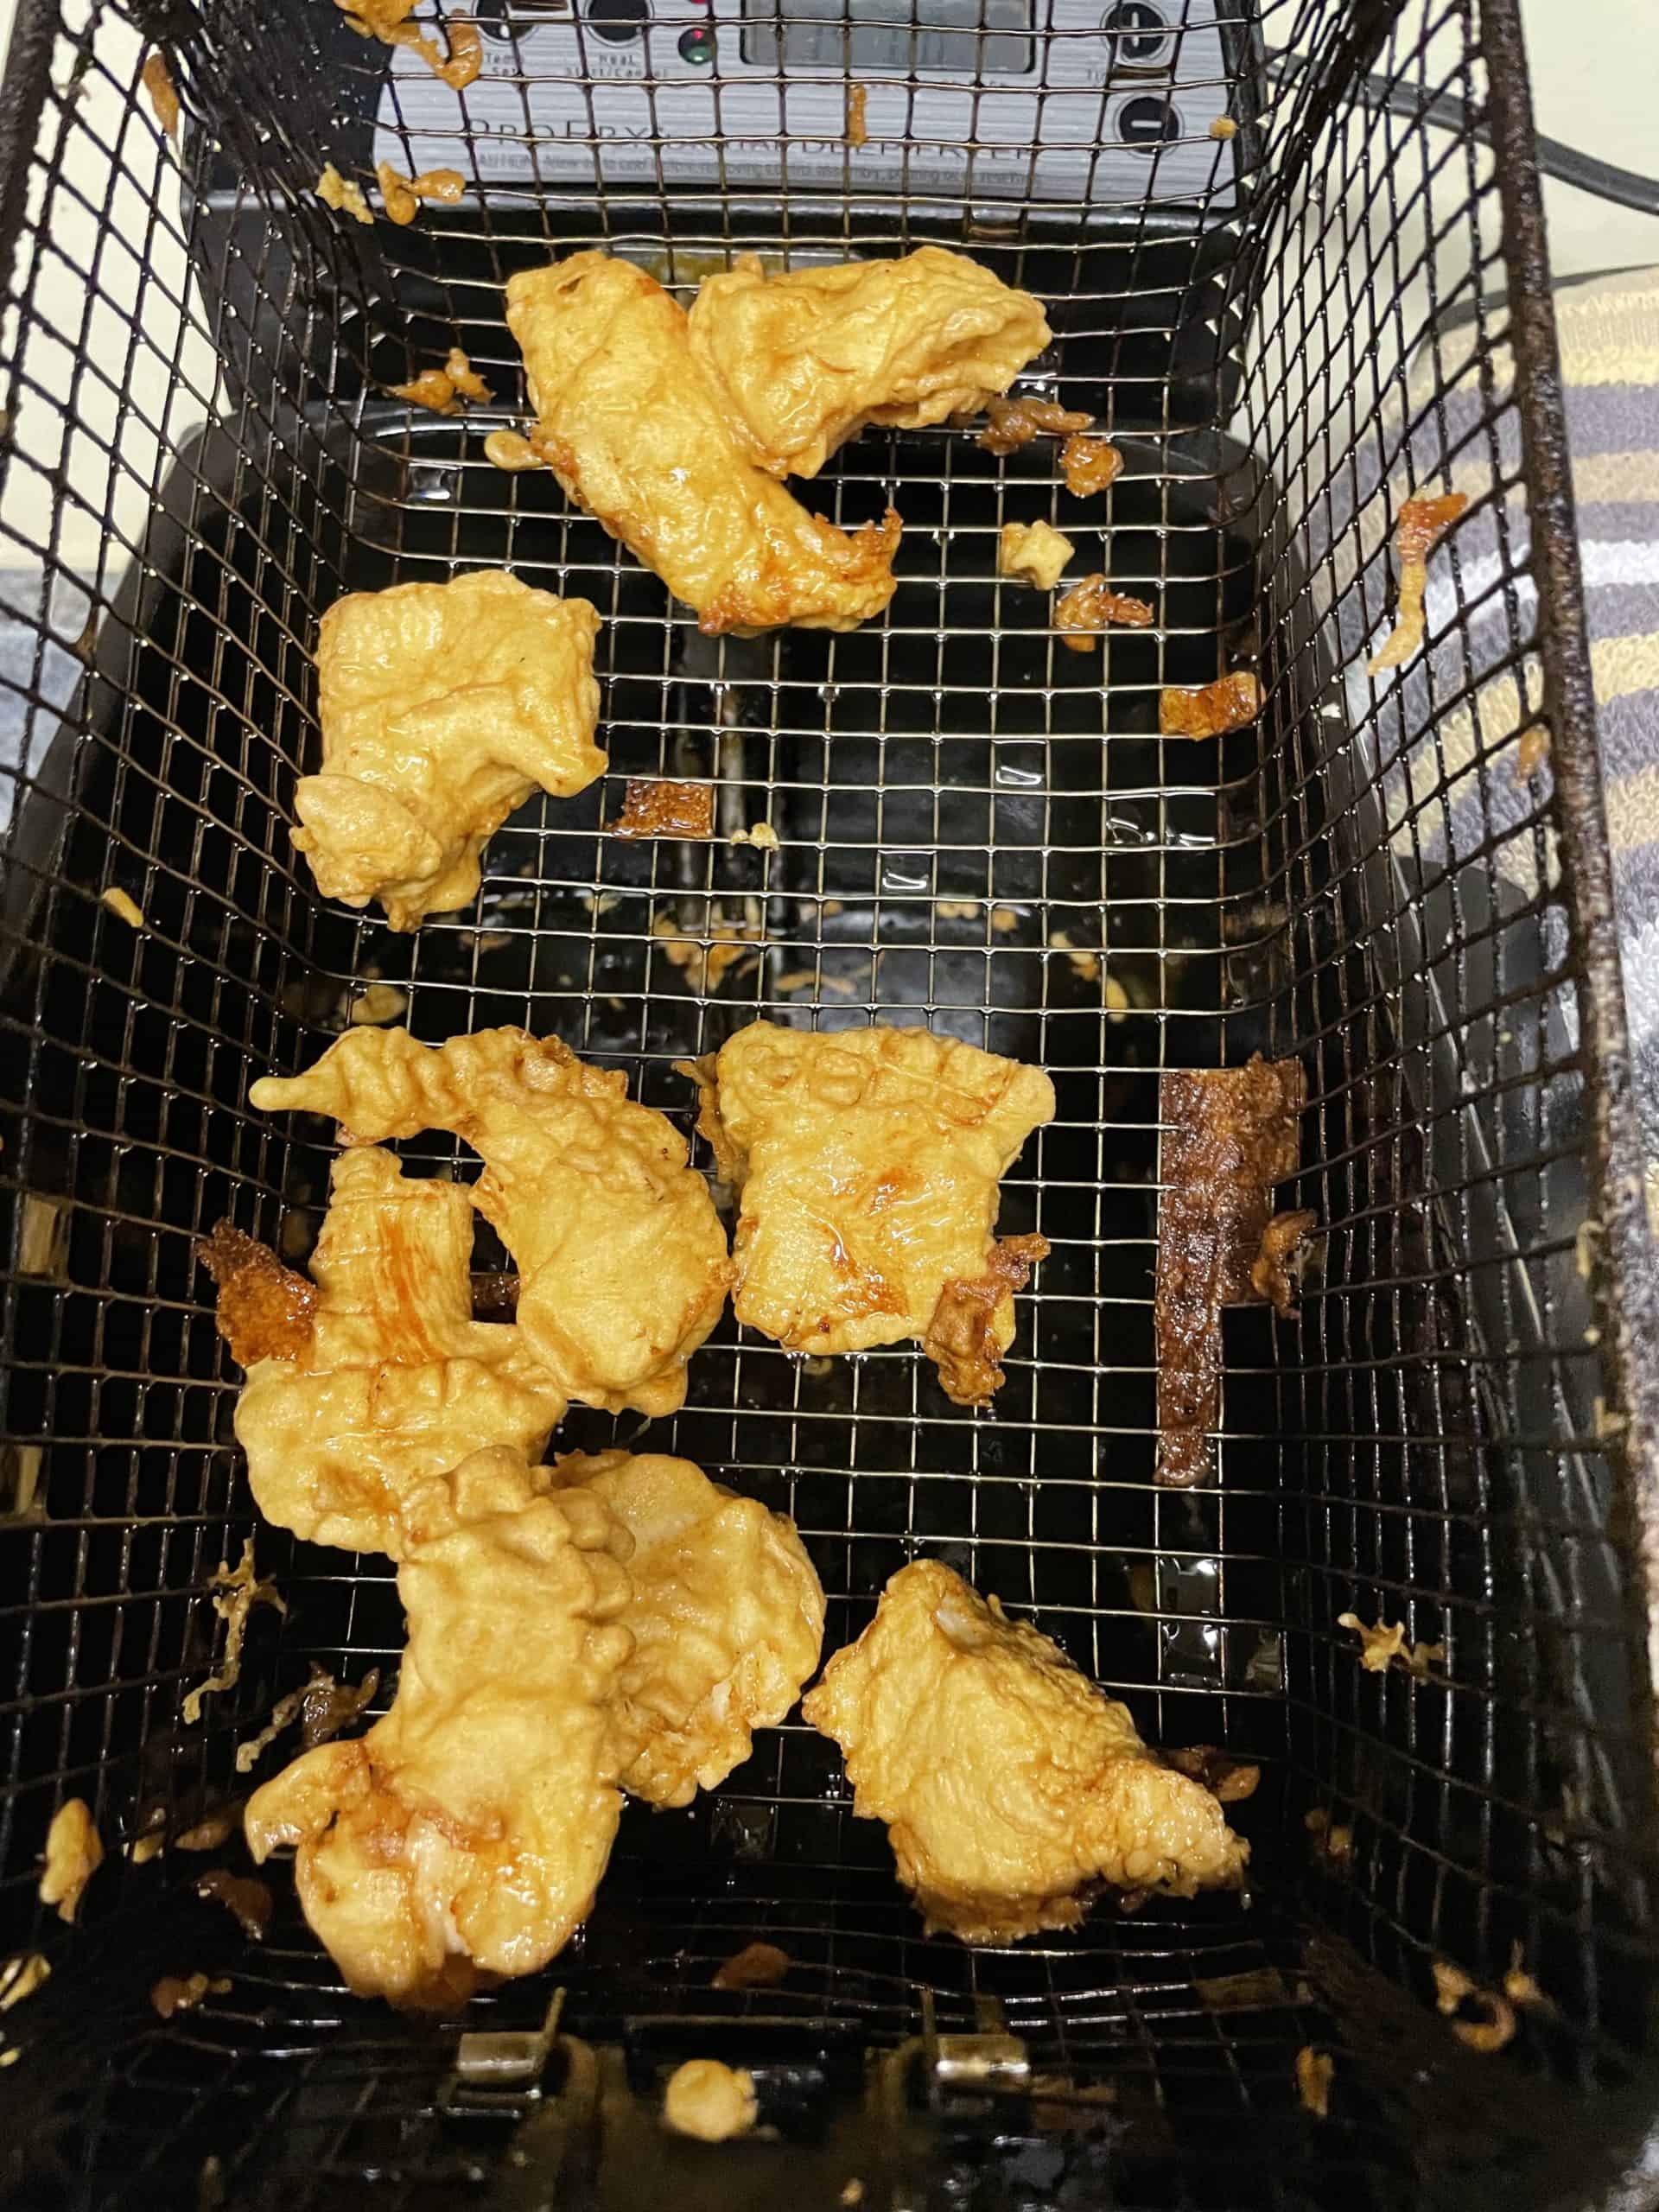 Deep Fryer Basket with fully cooked homemade chicken nuggets.